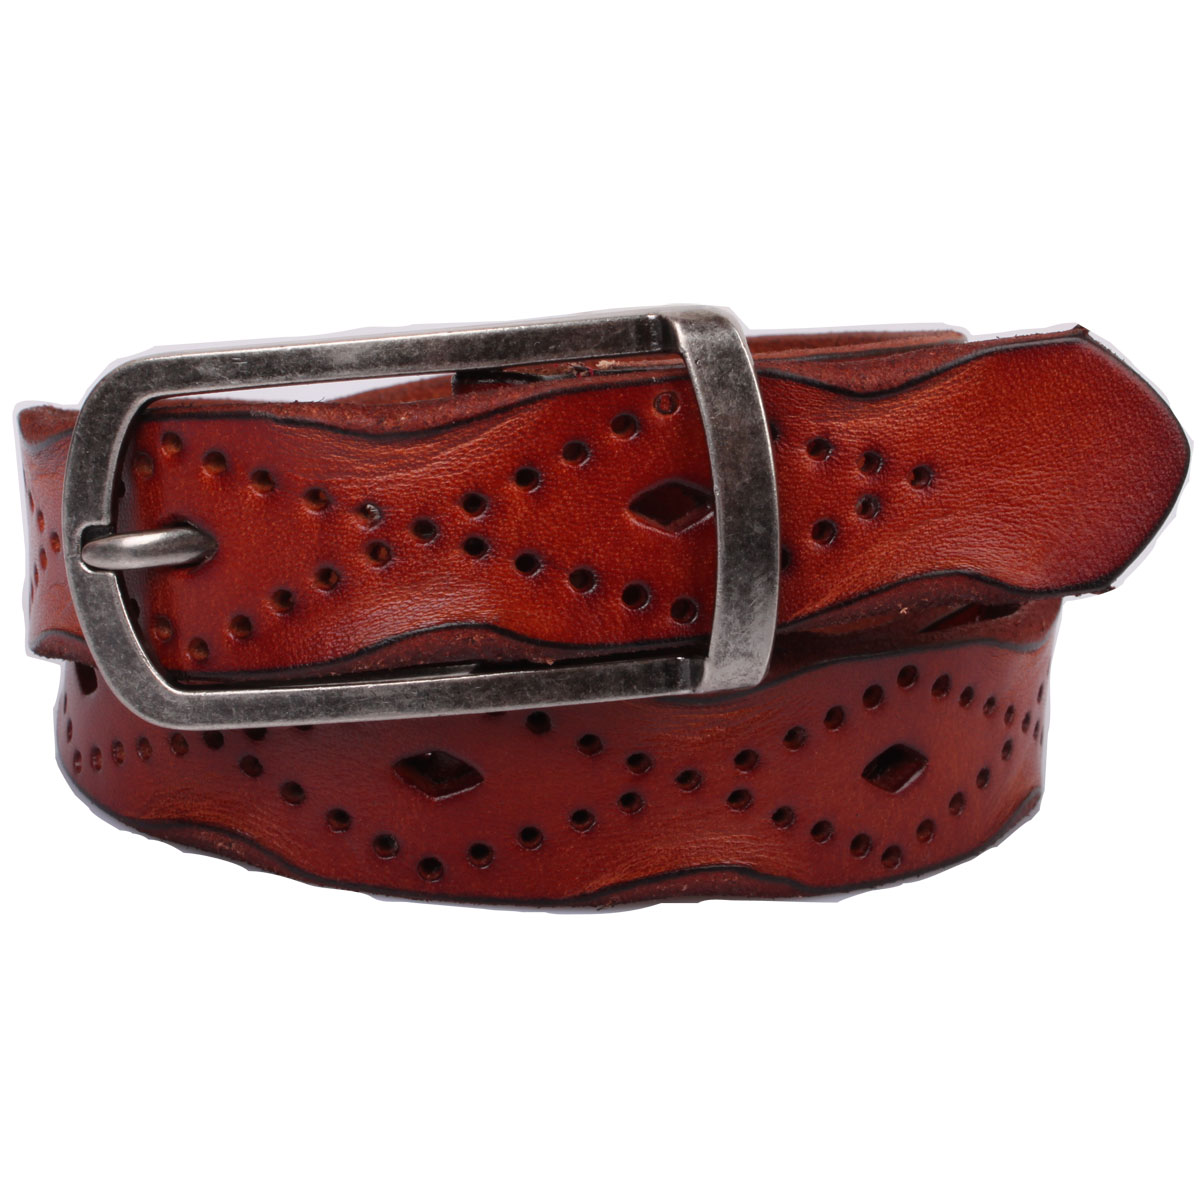 Belt female genuine leather denim first layer of cowhide sweet strap rivet laciness casual empty thread